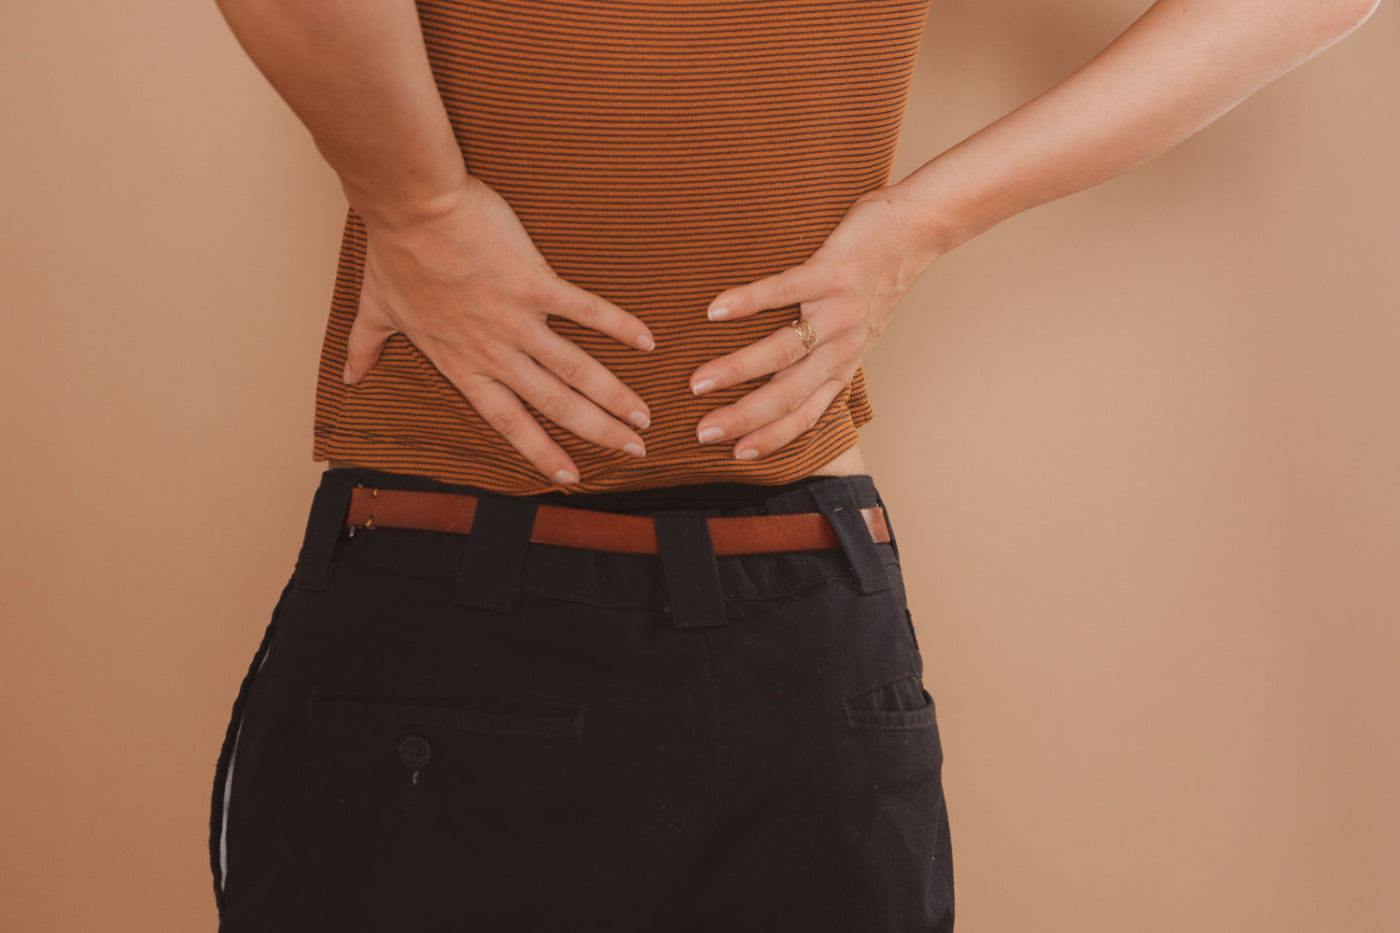 The Connection Between Back Pain and Period Pain